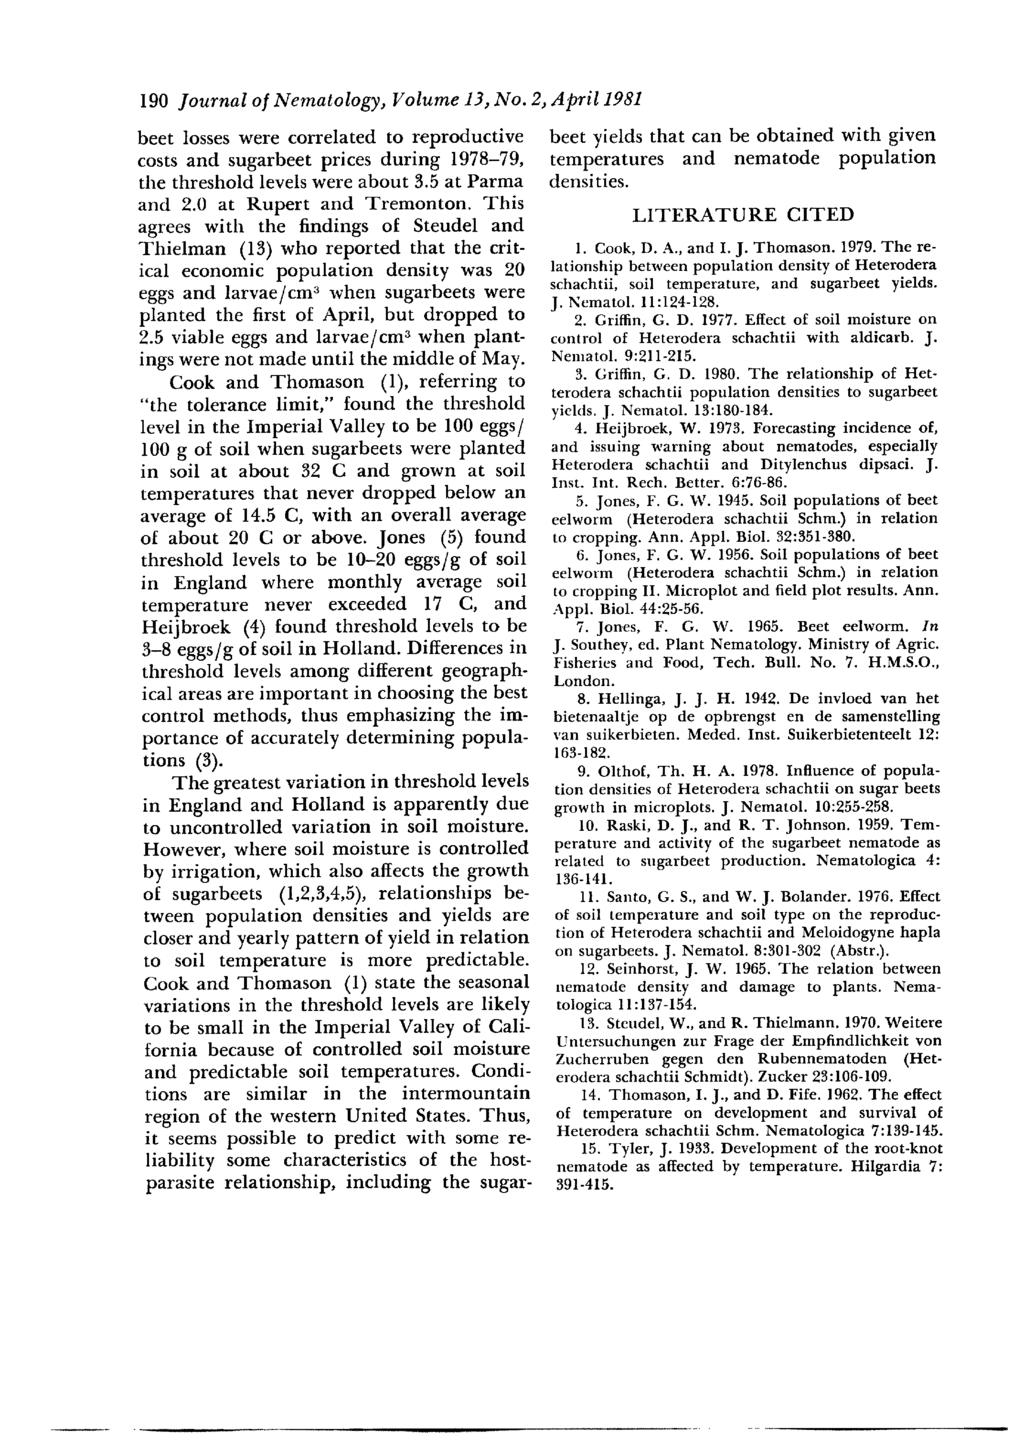 190 Journal of Nematology, Volume 13, No. 2, April 1981 beet losses were correlated to reproductive costs and sugarbeet prices during 1978-79, the threshold levels were about 3.5 at Parma and 2.